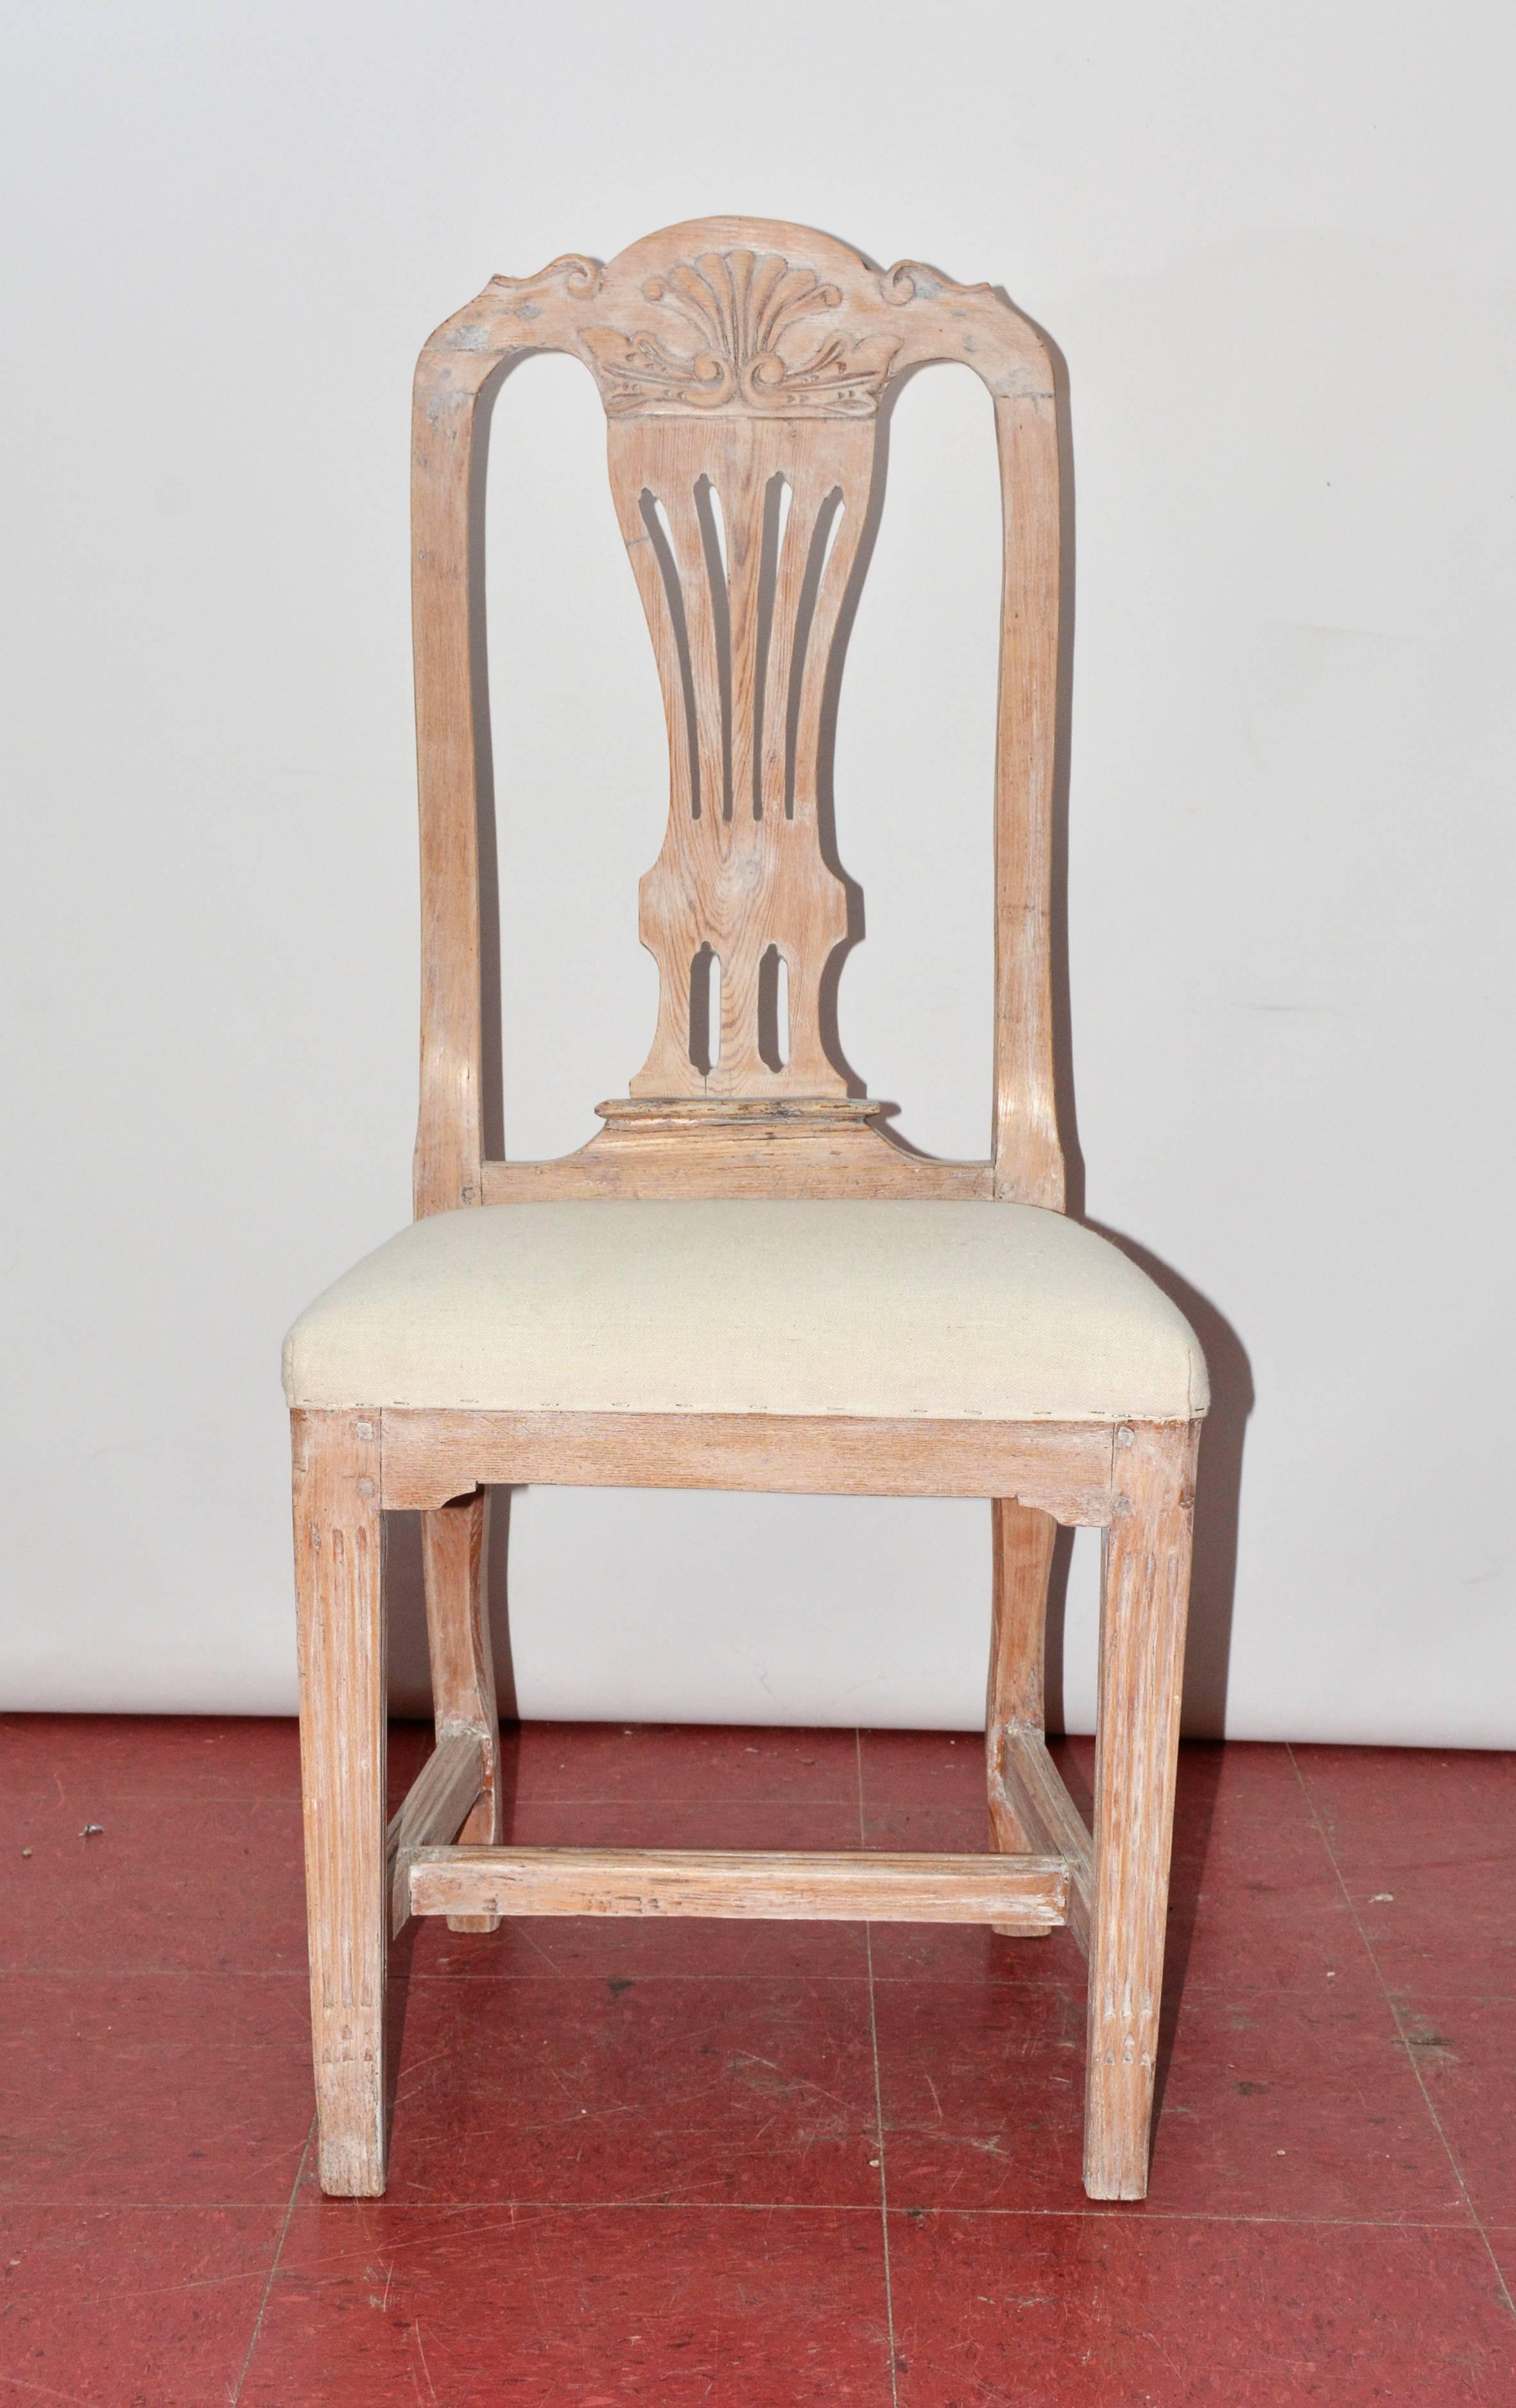 Wonderful Swedish white washed side or office chair with carved details.